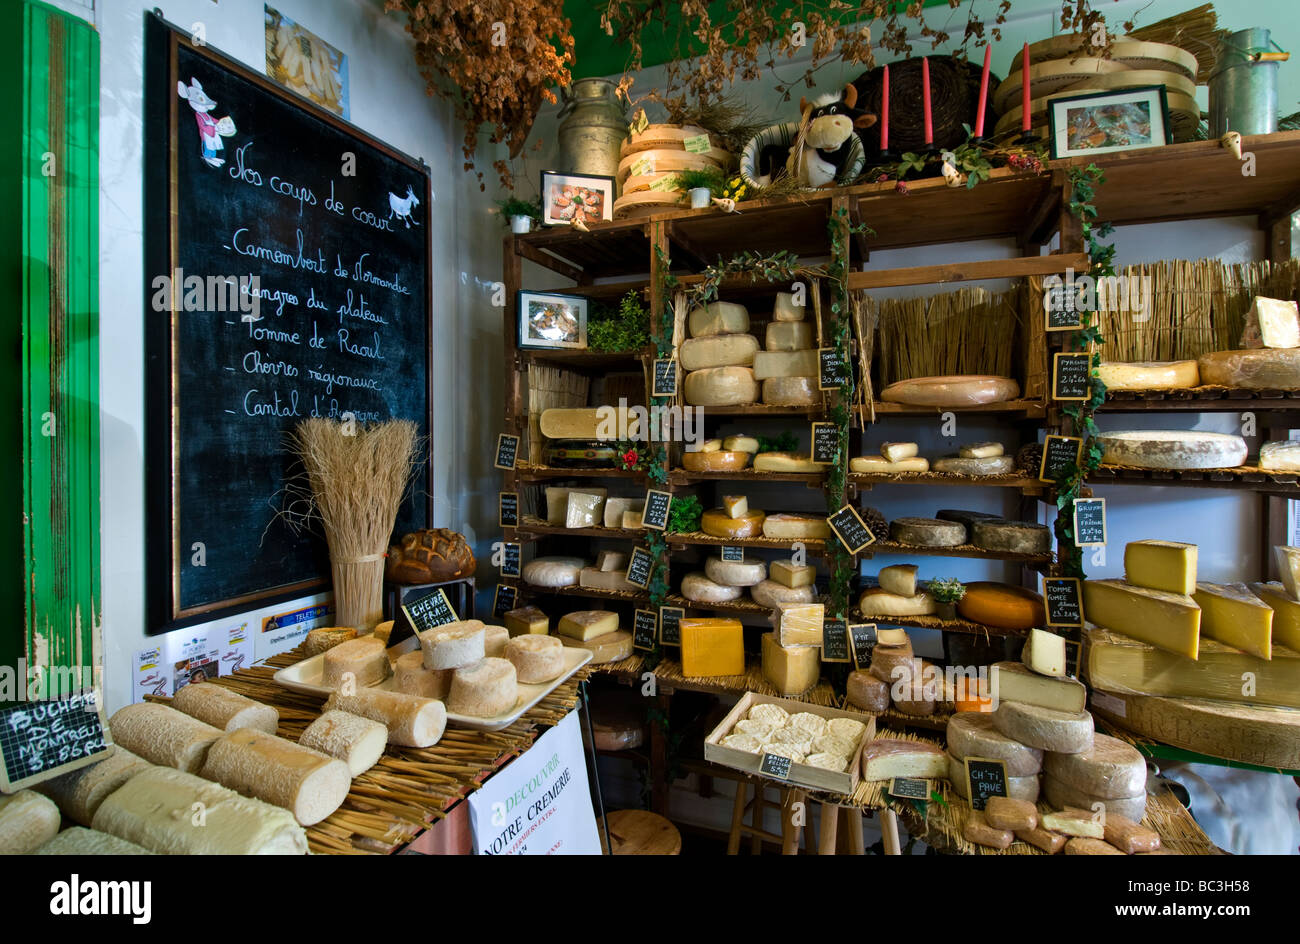 FRENCH CHEESE SHOP FRANCE Selection of handmade cheeses on display in the rustic artisan fromagerie cheese shop 'Caseus' Montreuil sur Mer France Stock Photo